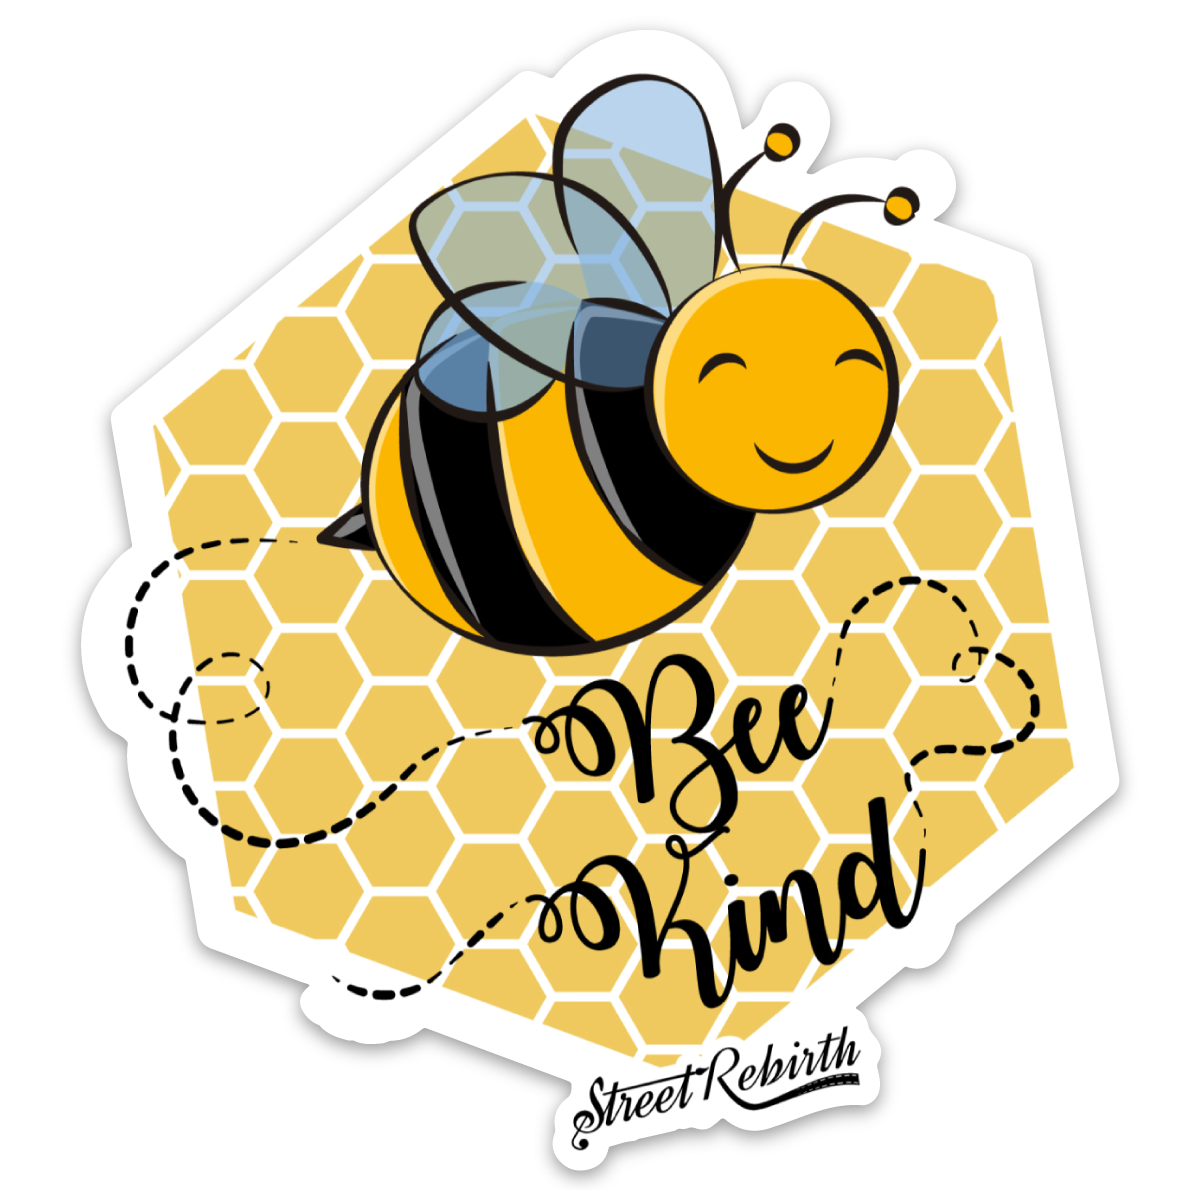 BEE KIND STICKER – ONE 4 INCH WATER PROOF VINYL STICKER – FOR HYDRO FLASK, SKATEBOARD, LAPTOP, PLANNER, CAR, COLLECTING, GIFTING